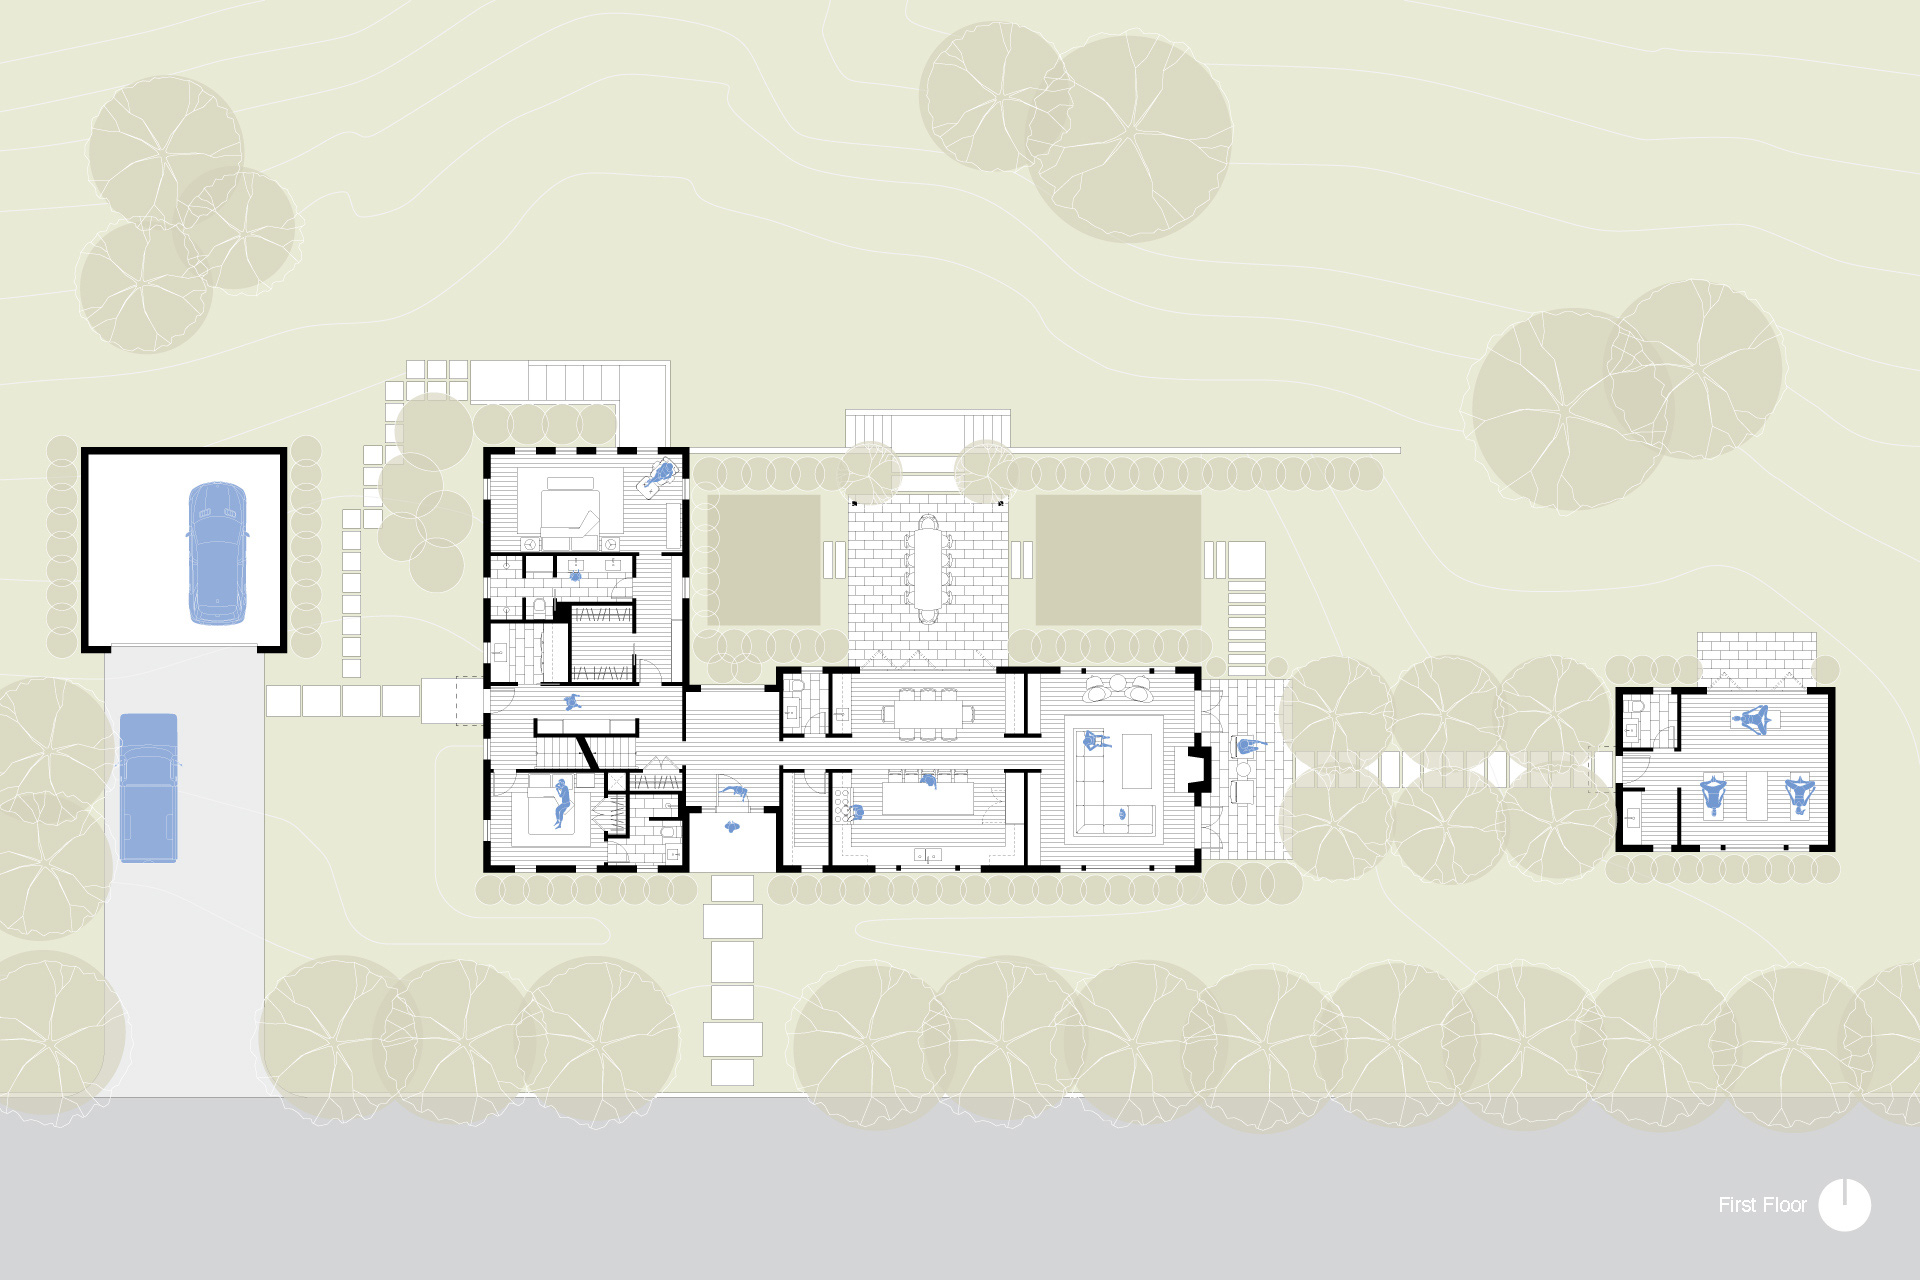 This is a plan of the first floor of the SW Farmhouse.